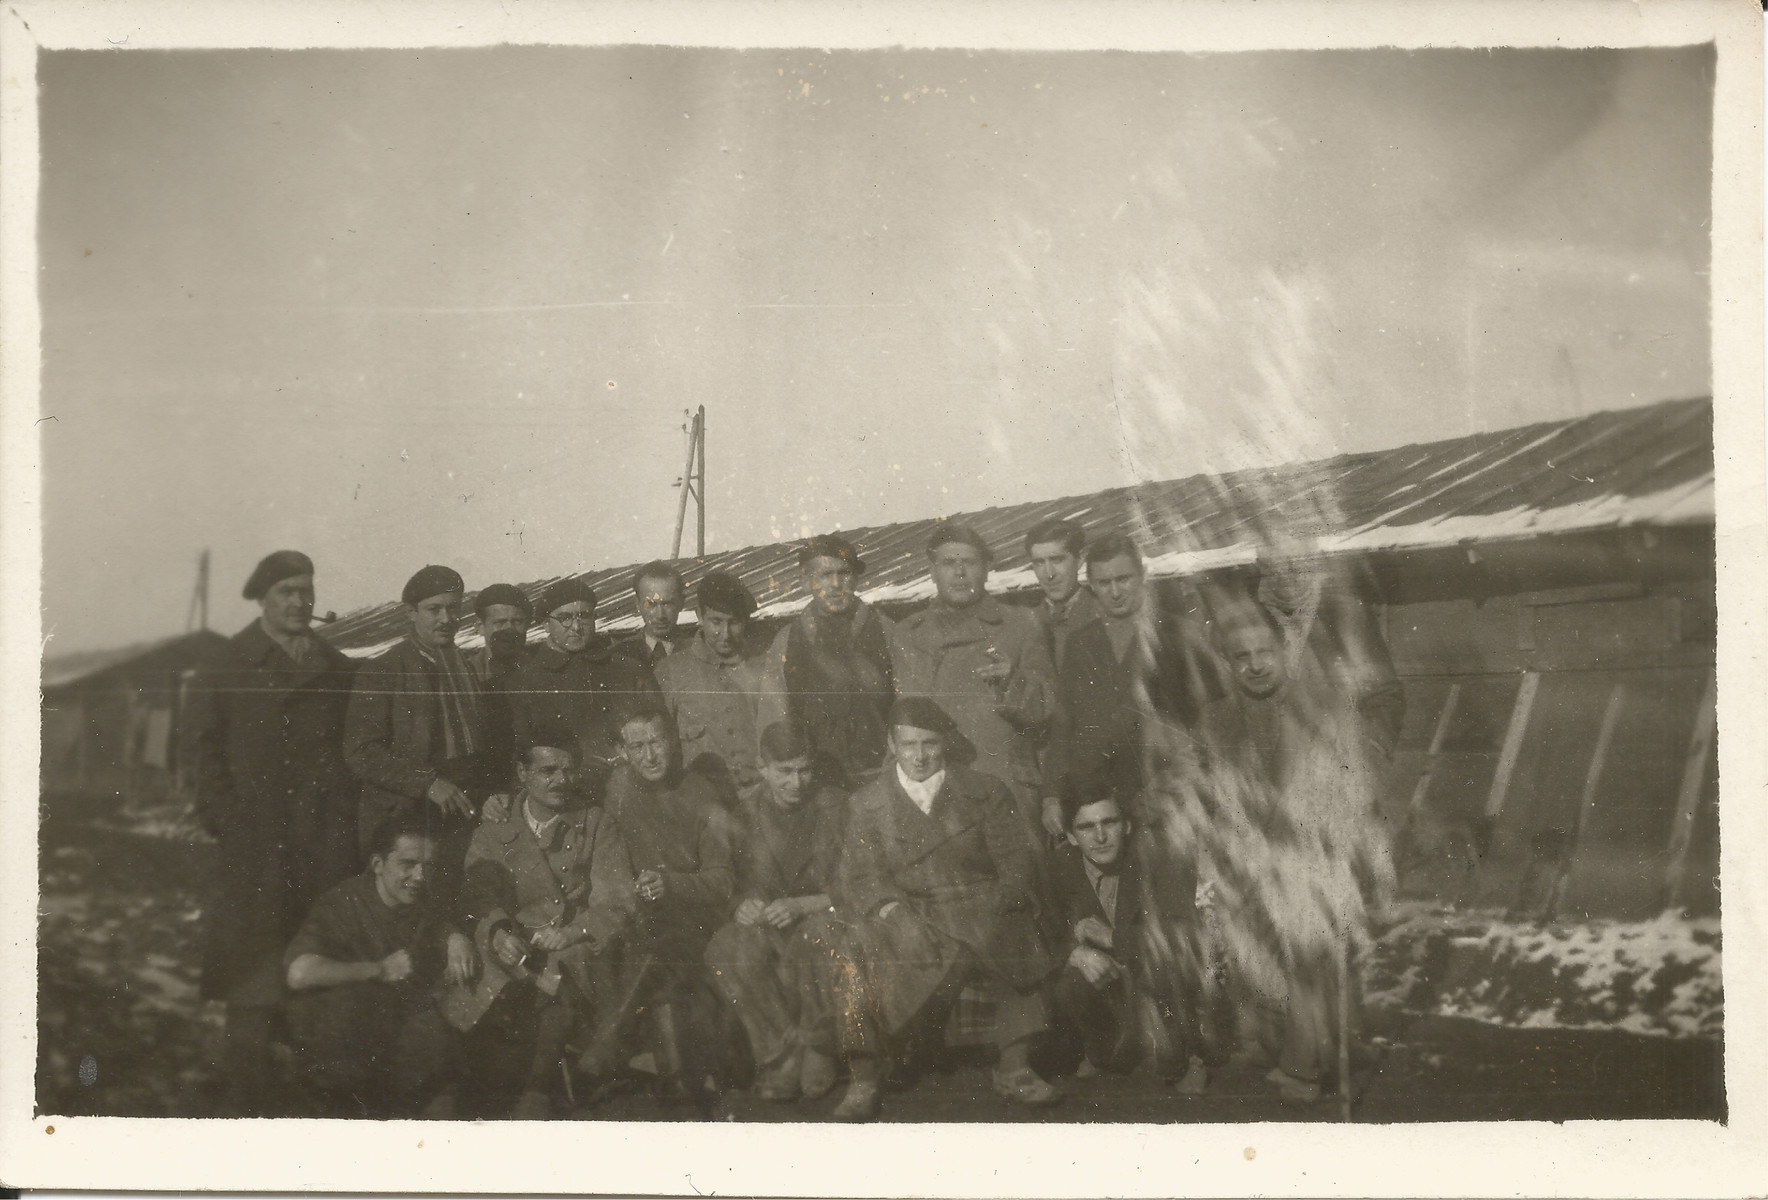 Group portrait of internees in the Gurs camp posing outside their barrack.  

Among those pictured is Siegfried Lindheimer (first row, fifth from the left).